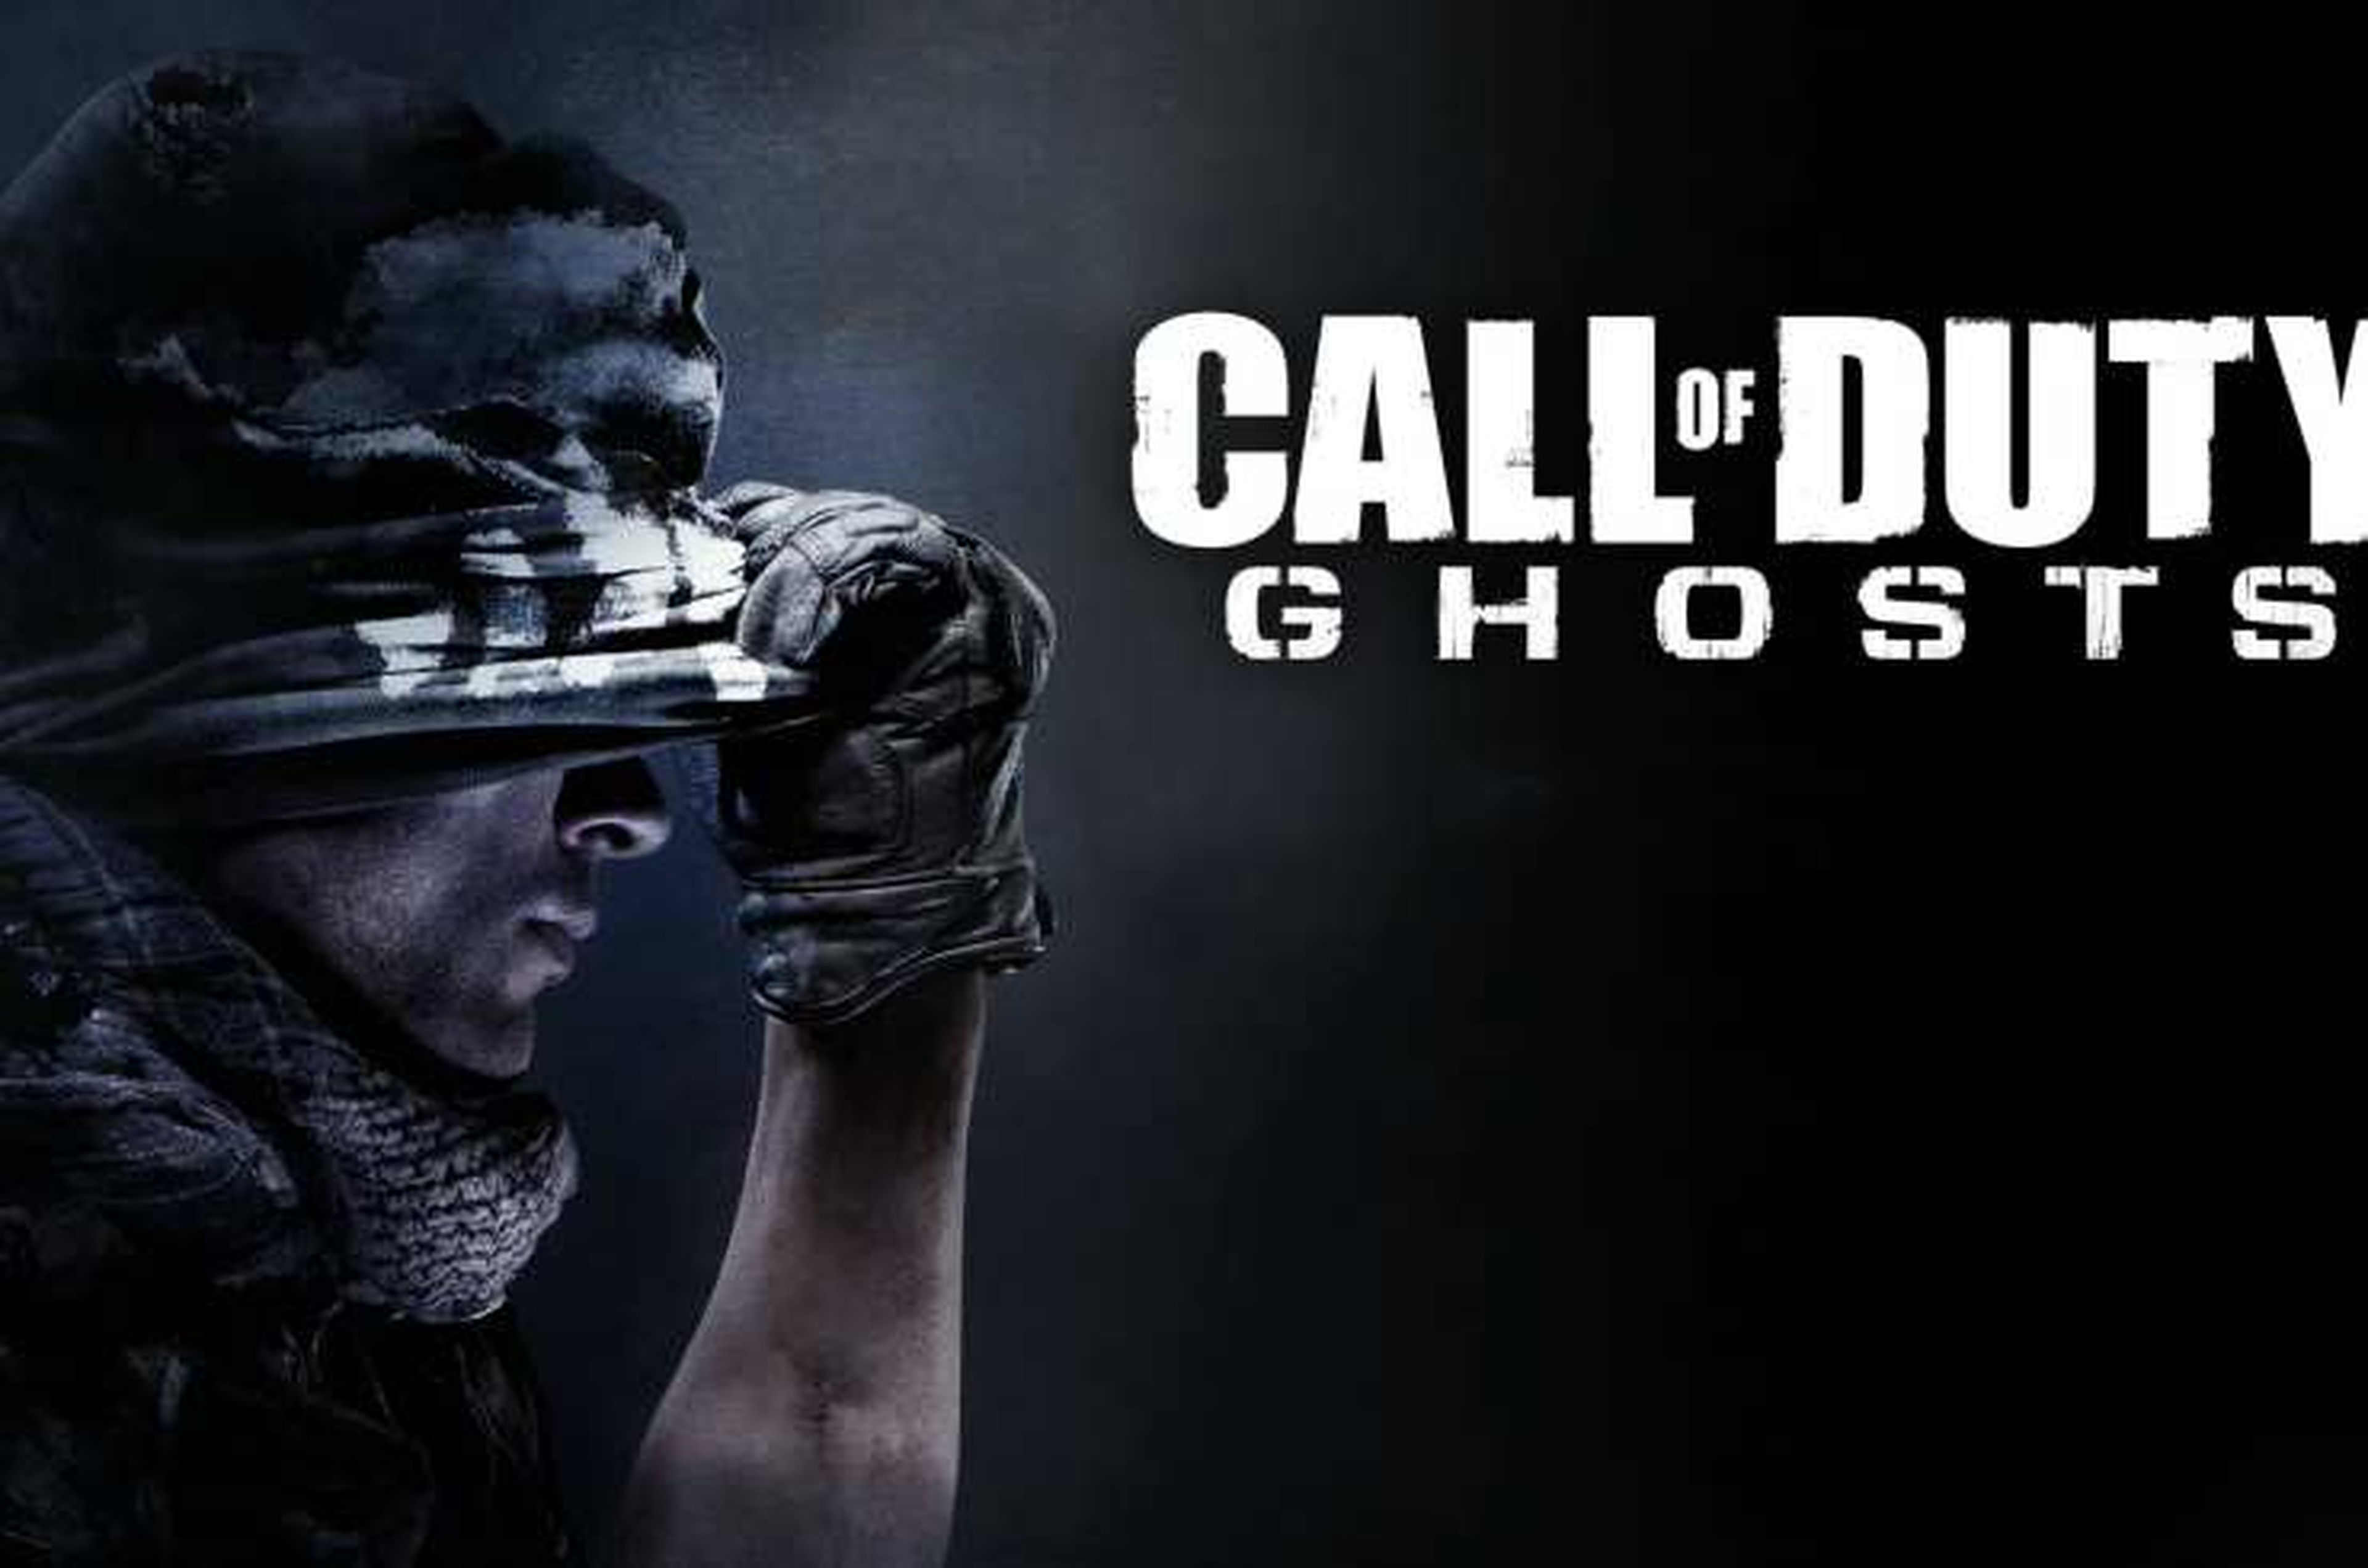 "Call of Duty: Ghosts"